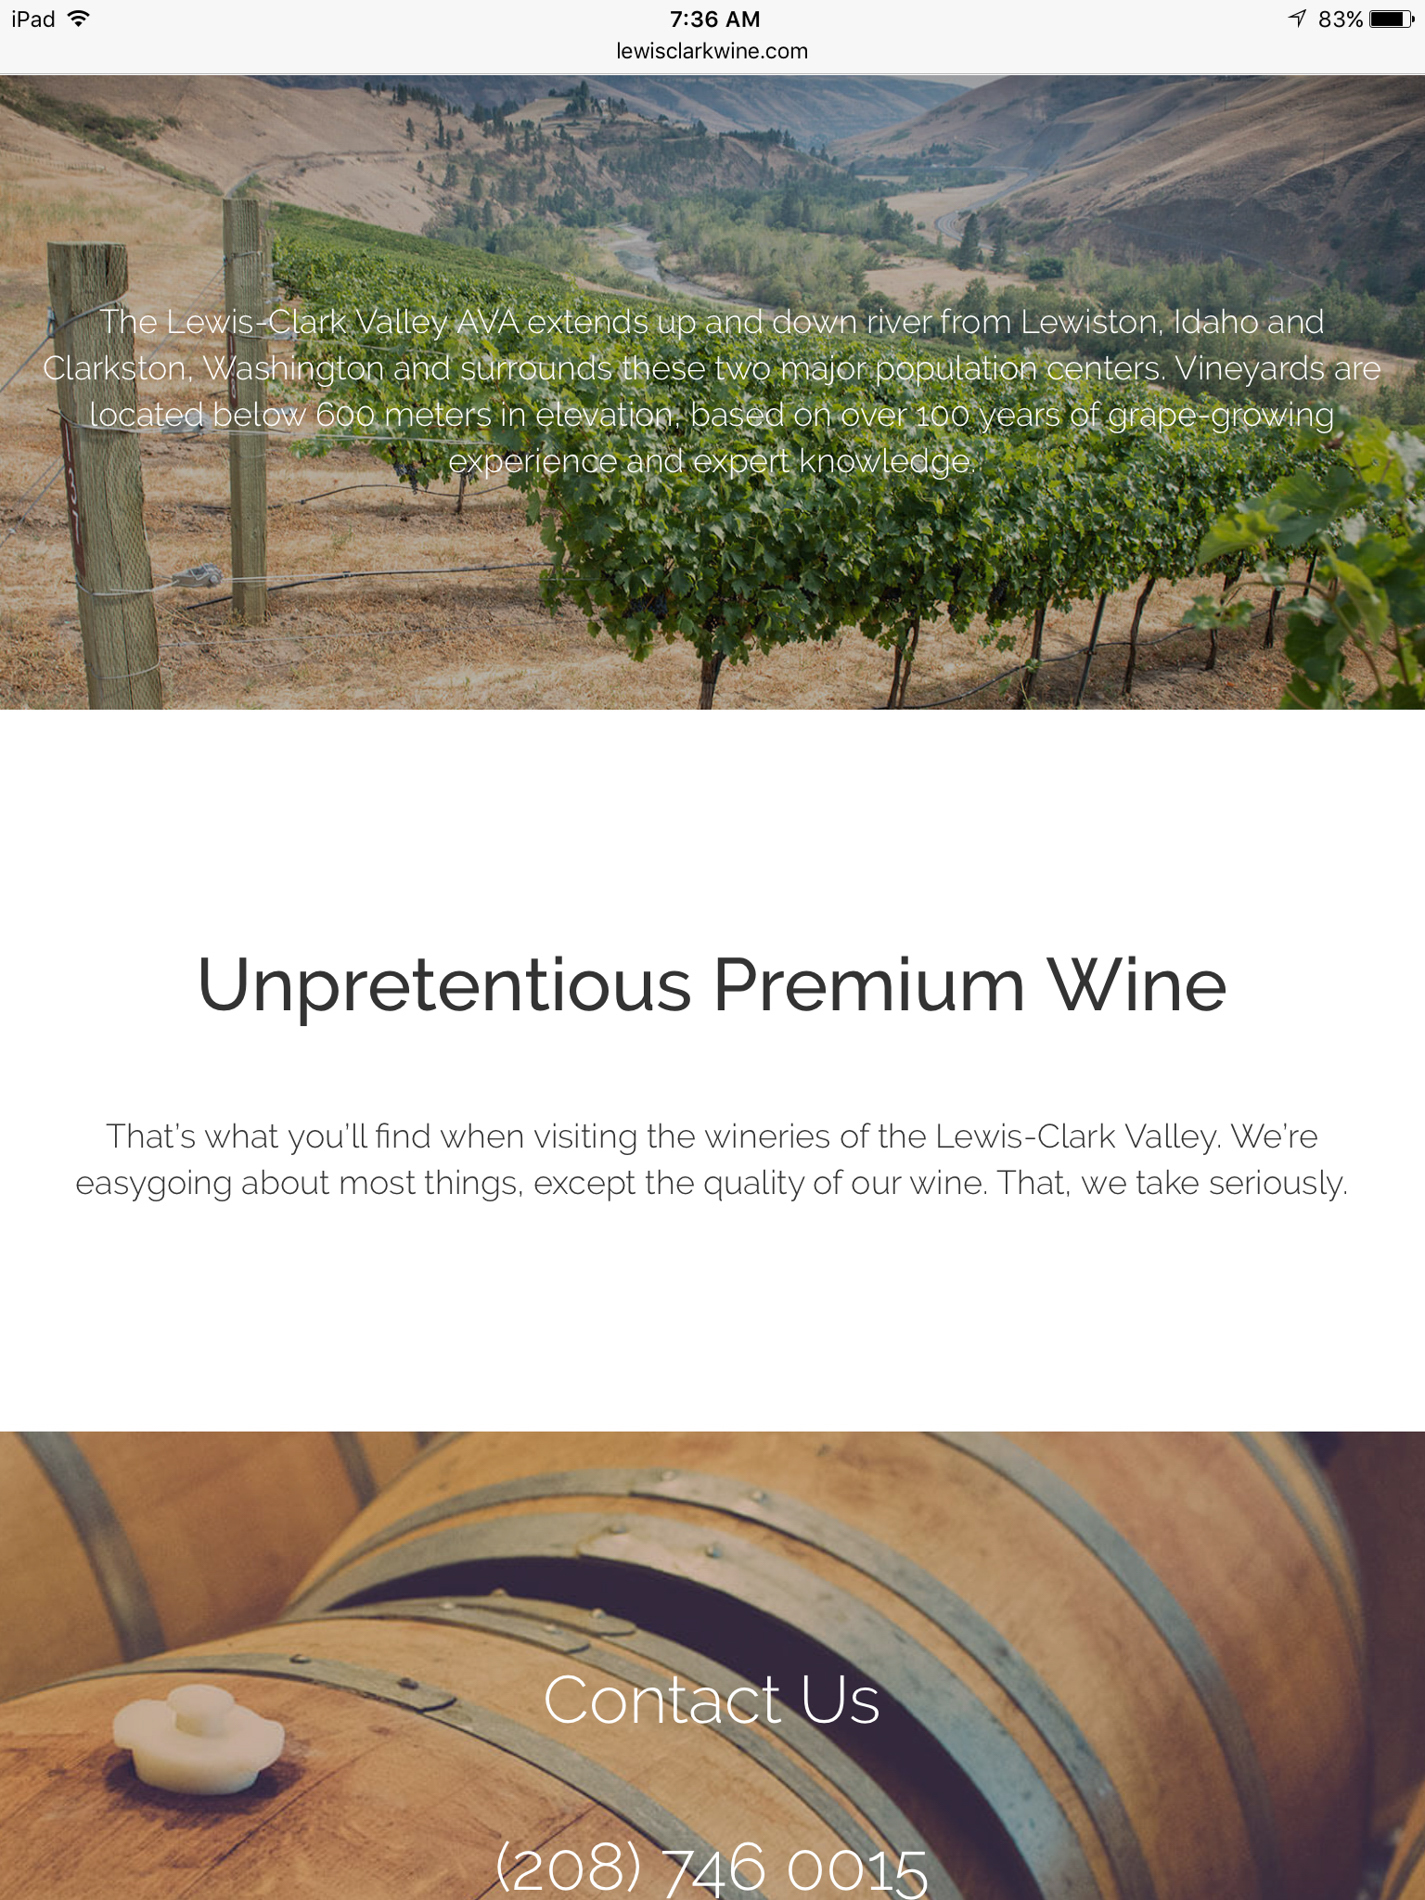 Winery Website Photography